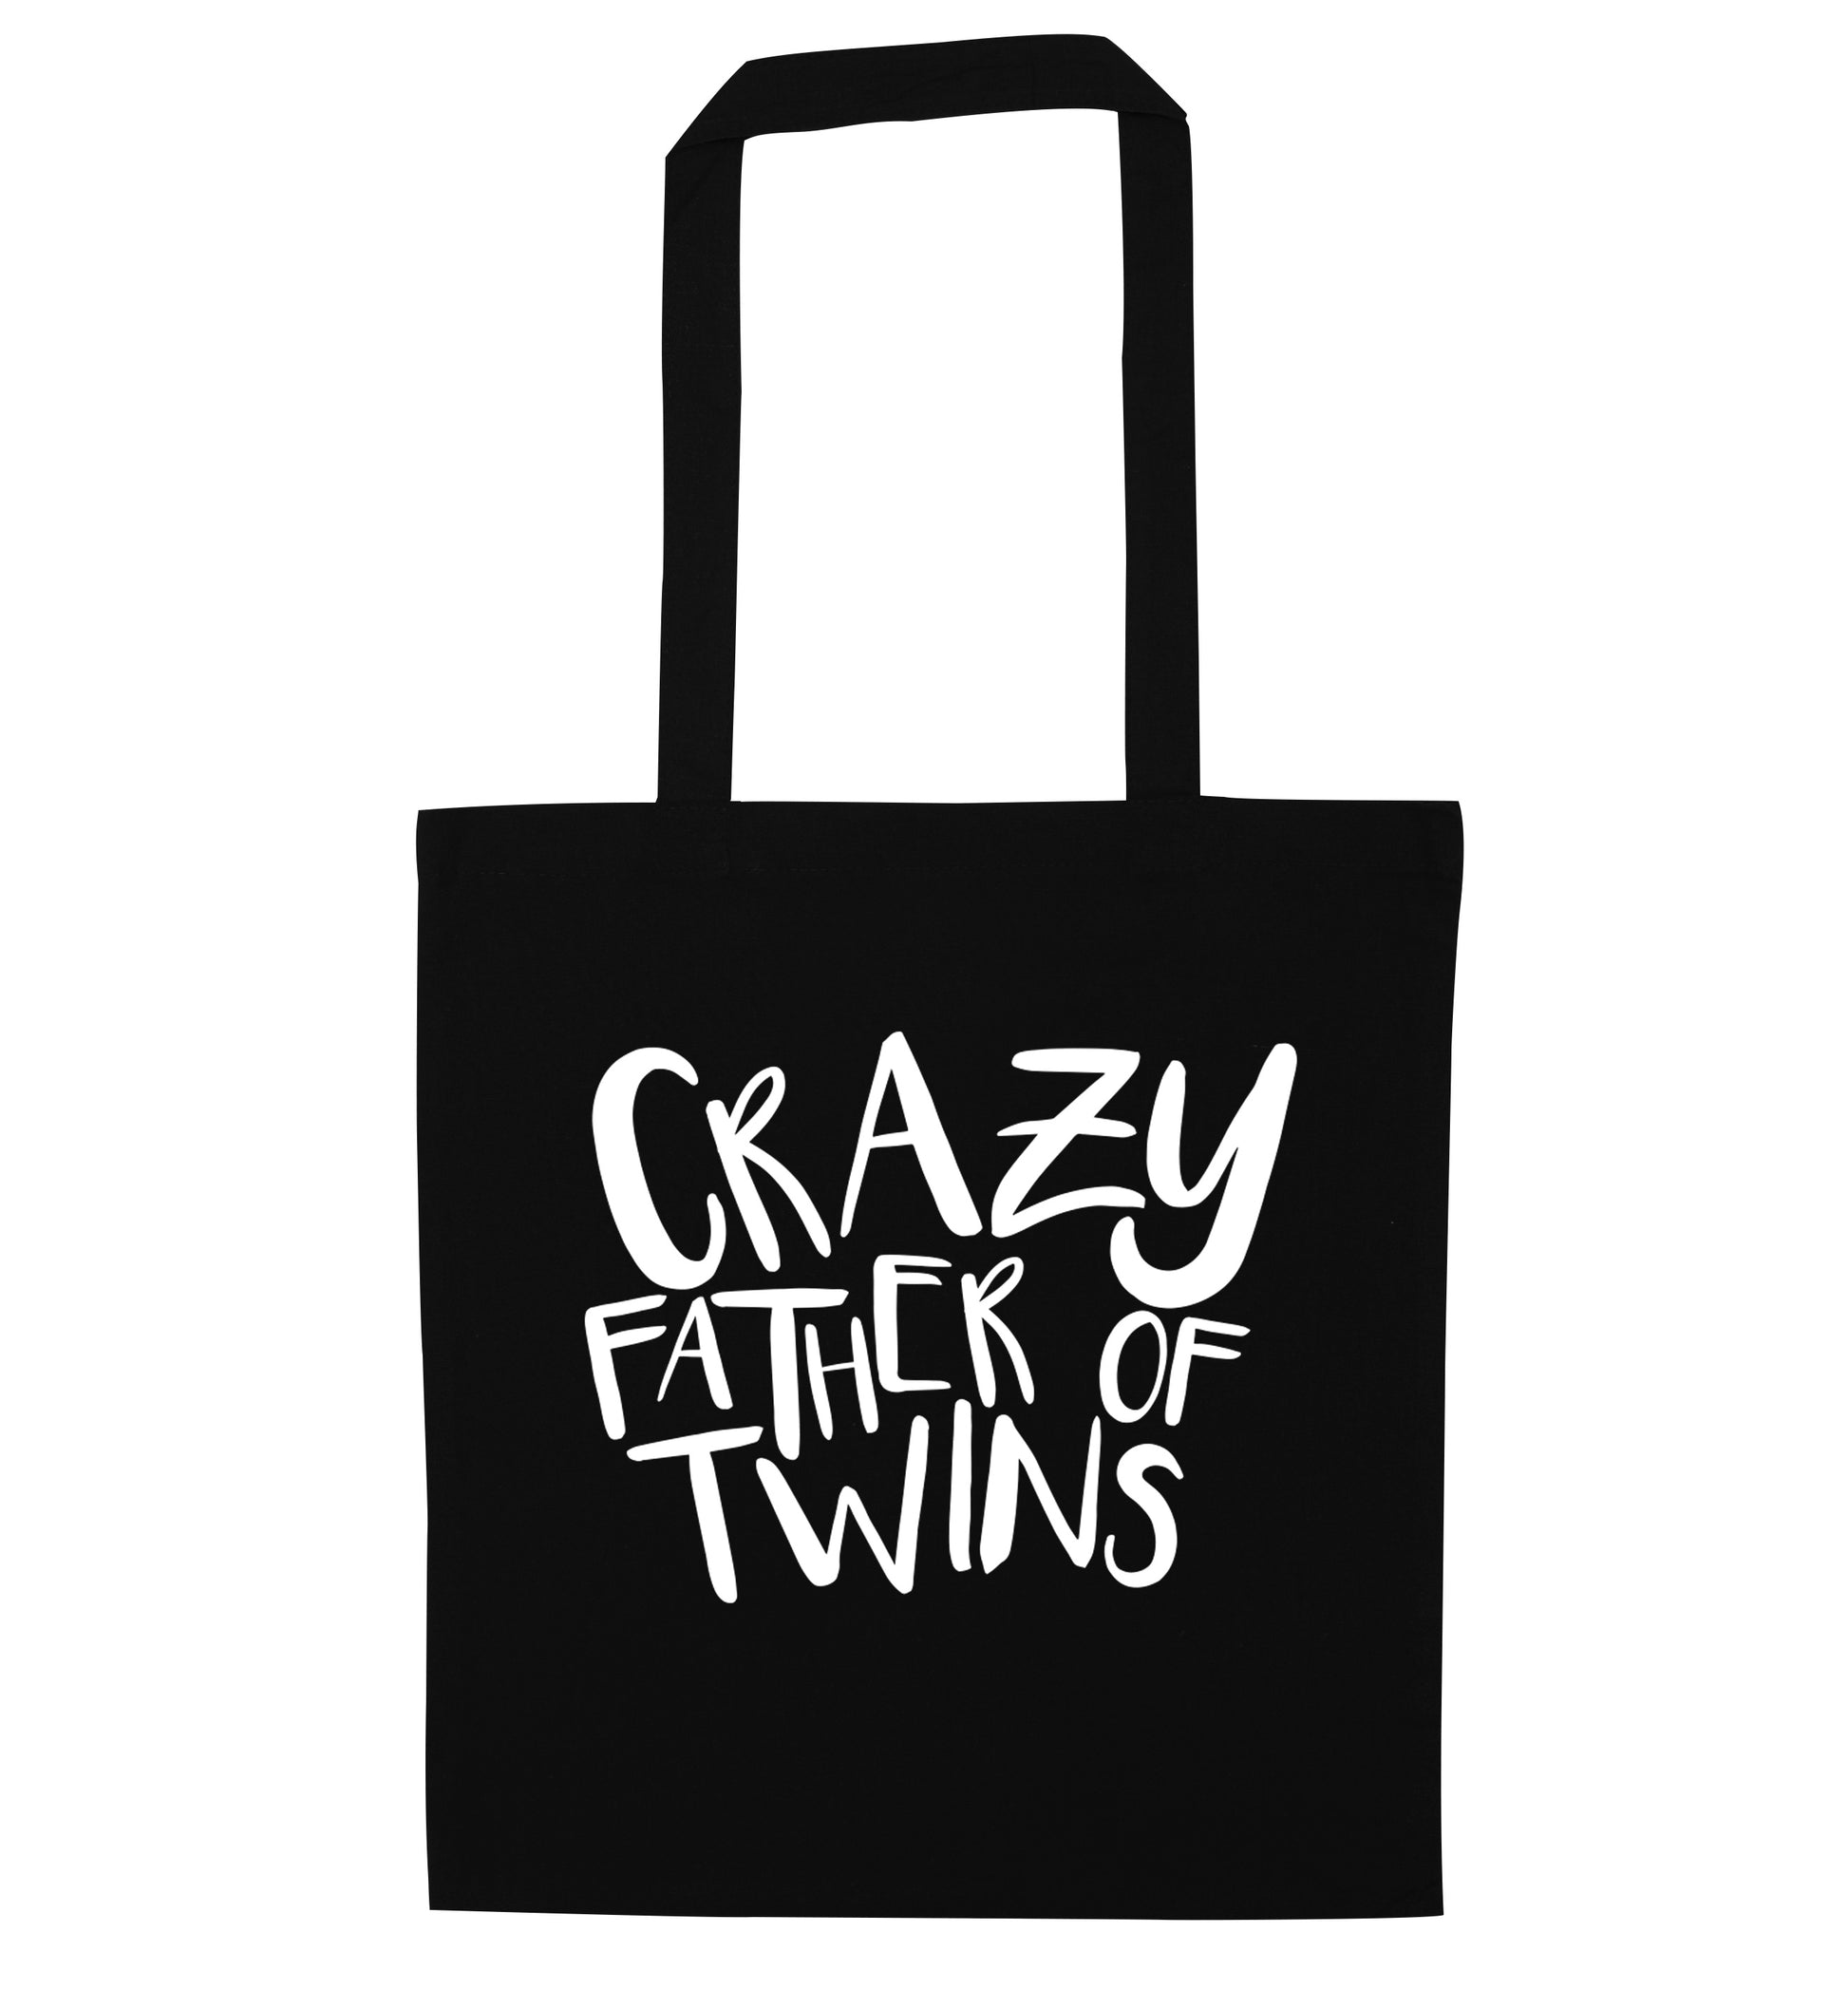 Crazy father of twins black tote bag